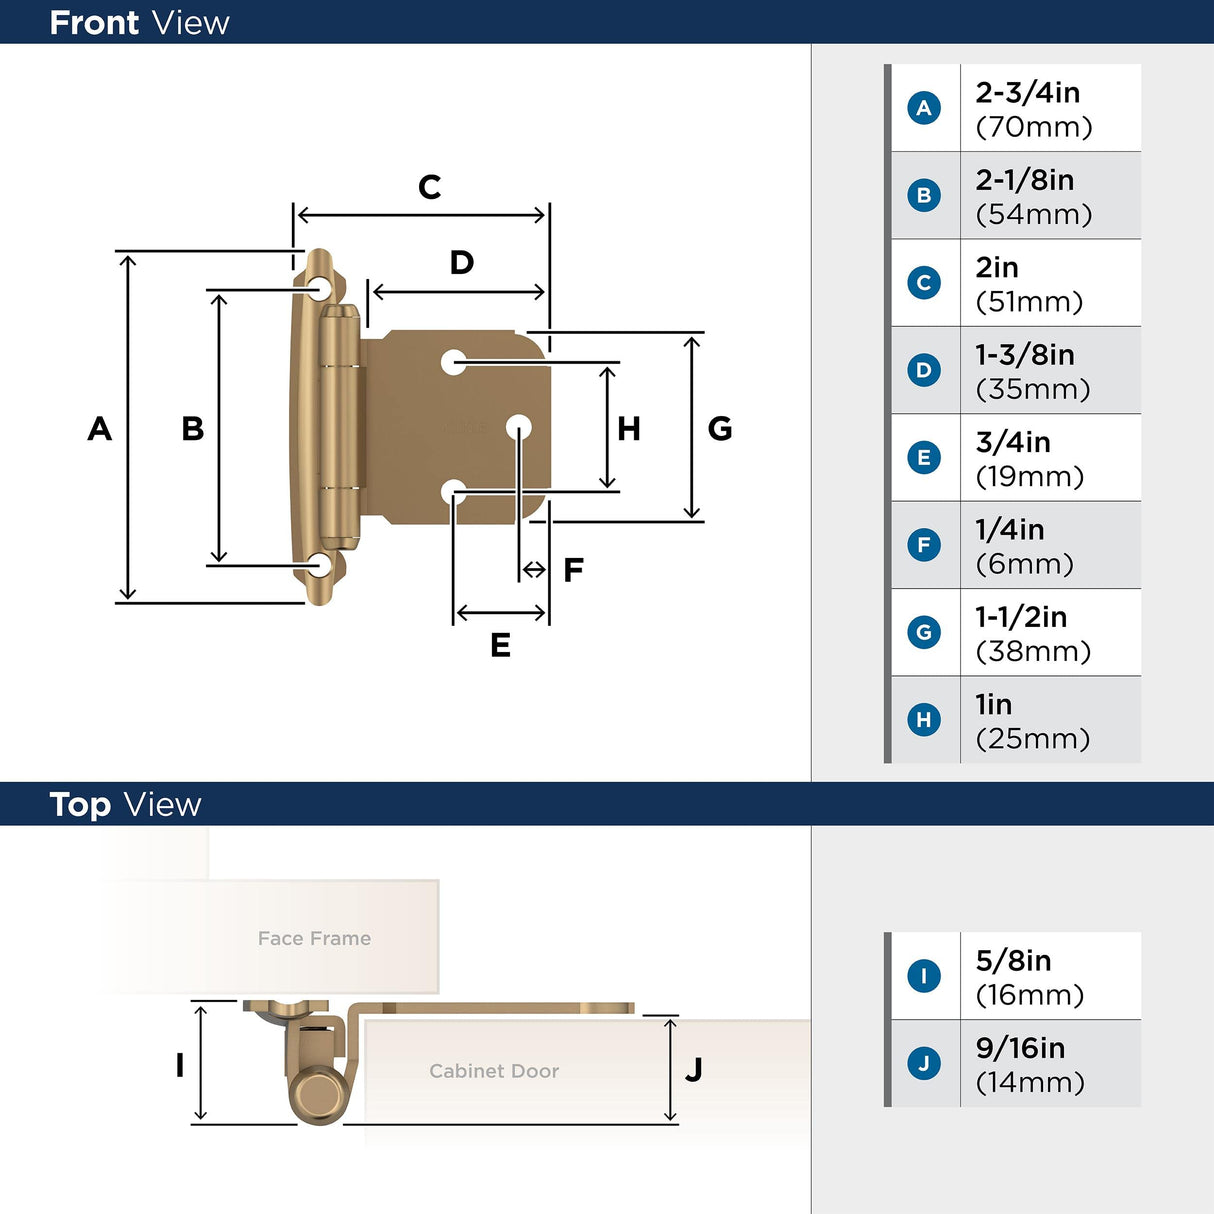 Amerock BPR7629CZ Face Frame Cabinet Hinge Variable Overlay Self Closing Face Mount Champagne Bronze Kitchen Cabinet Door Hinge 1 Pair/2 Pack Functional Hardware